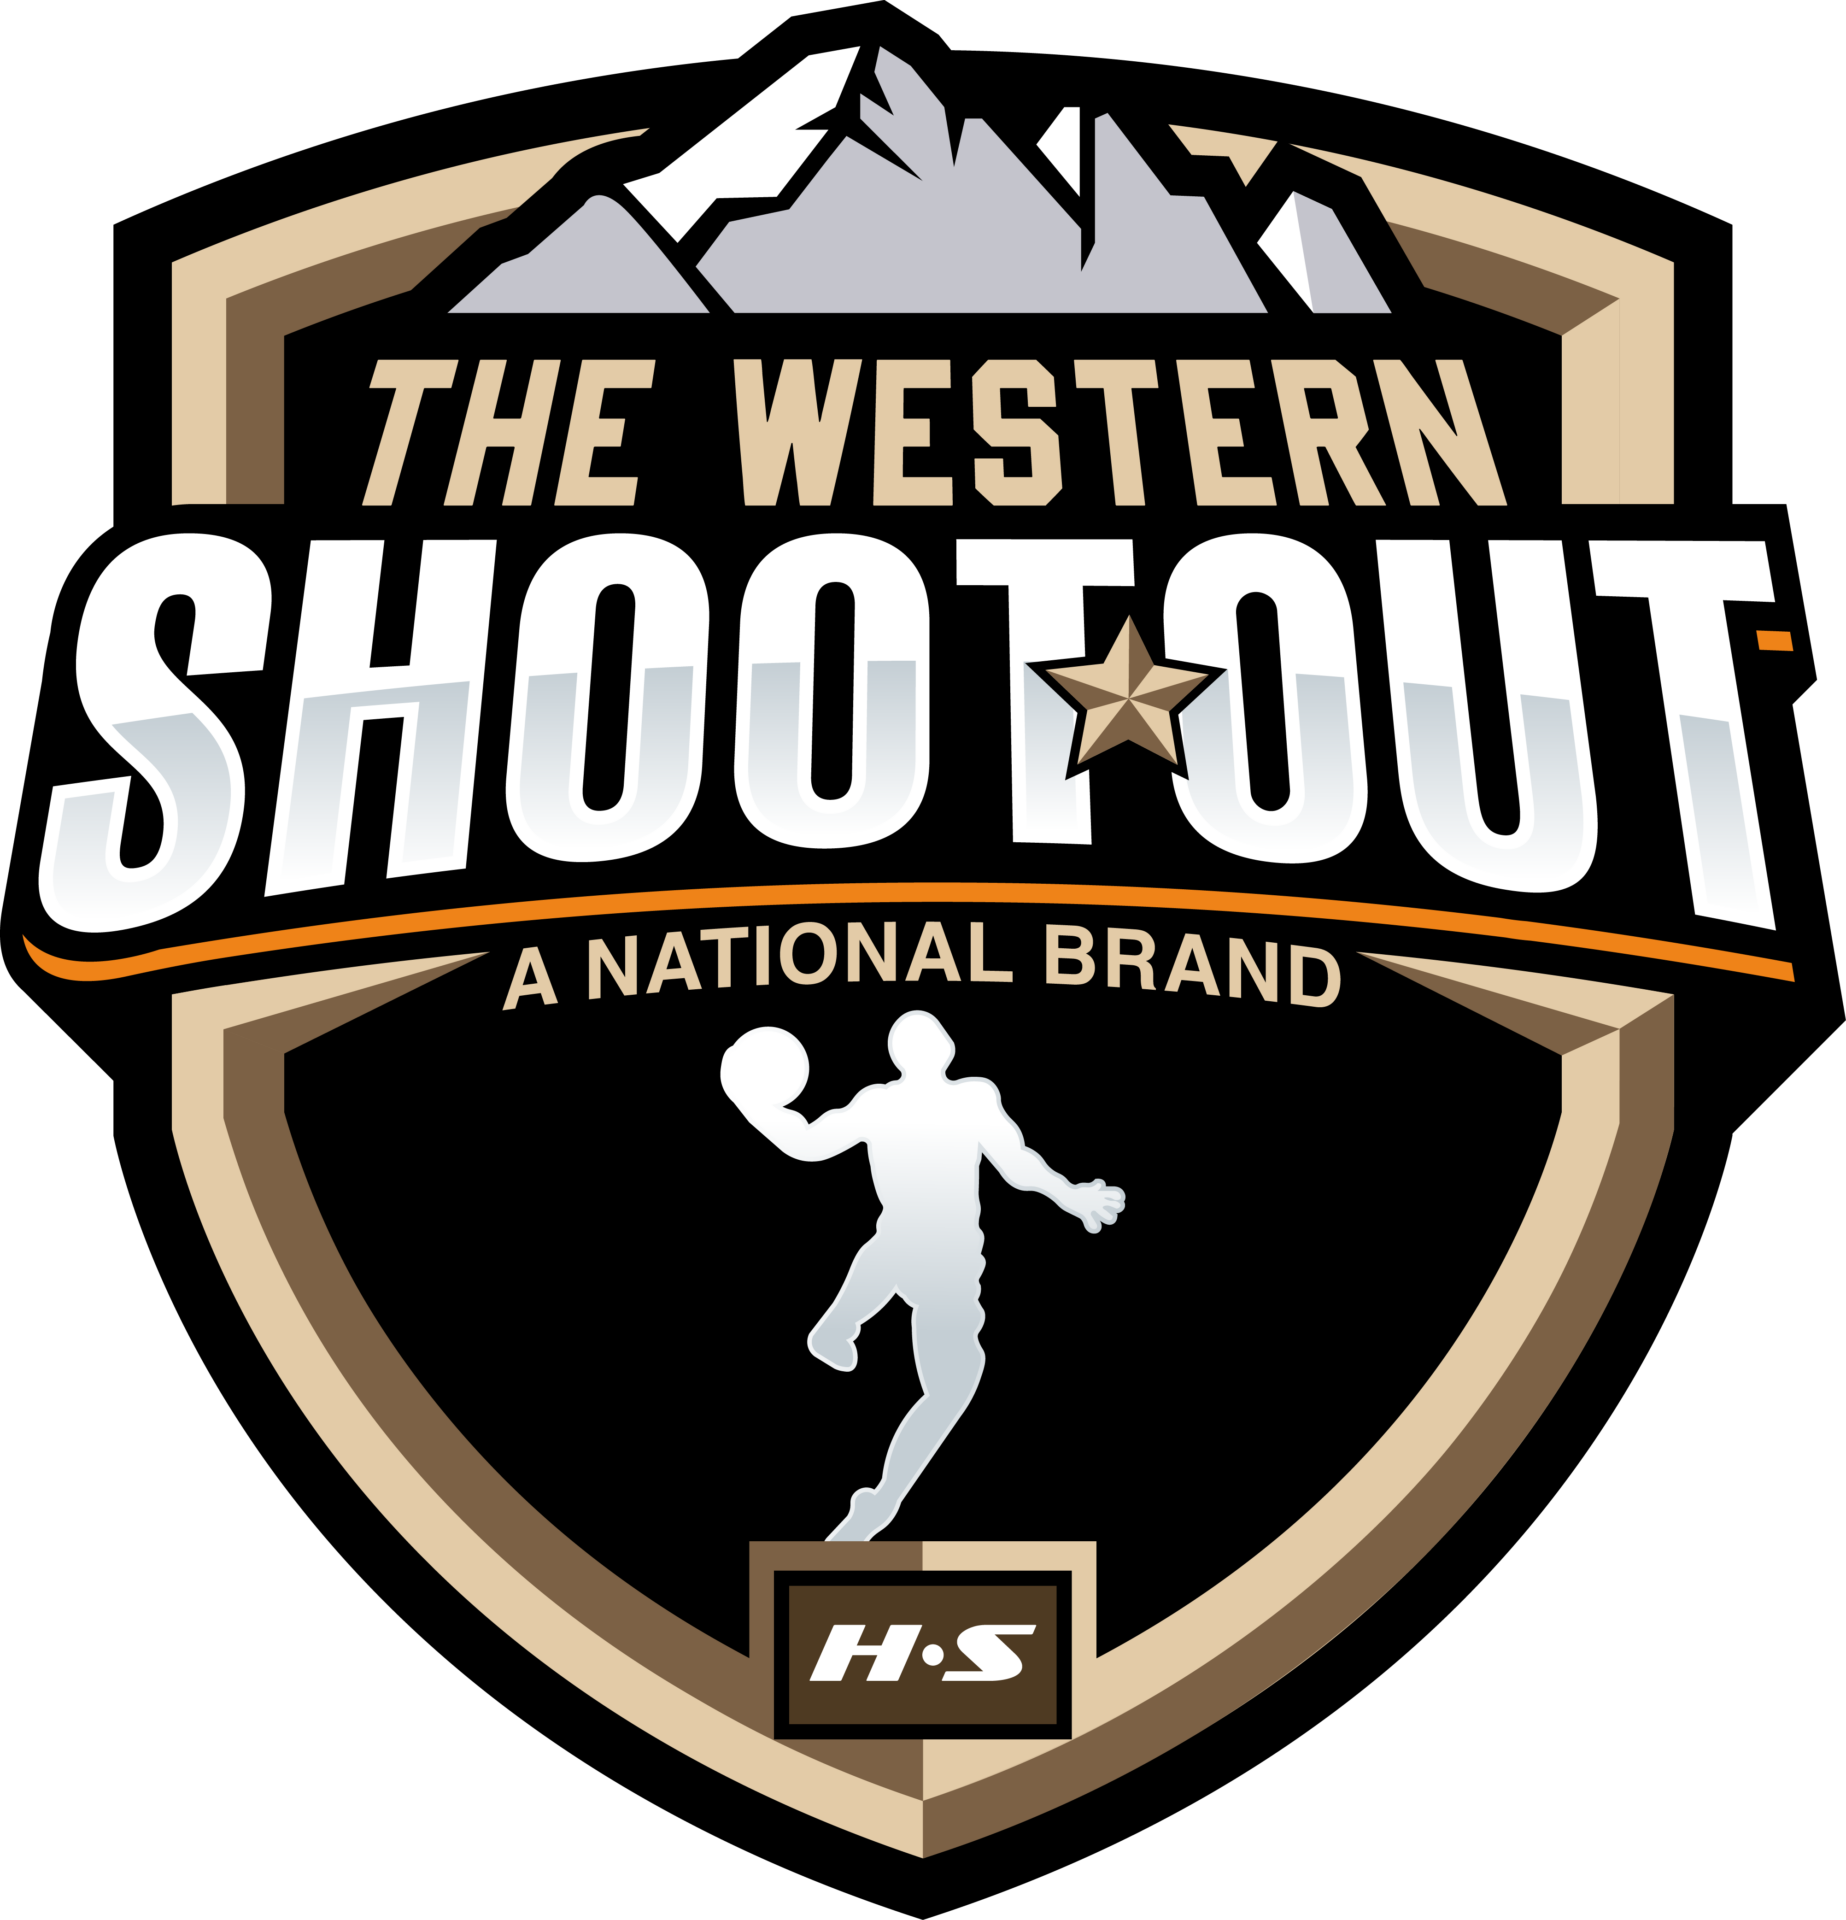 The Western Shootout